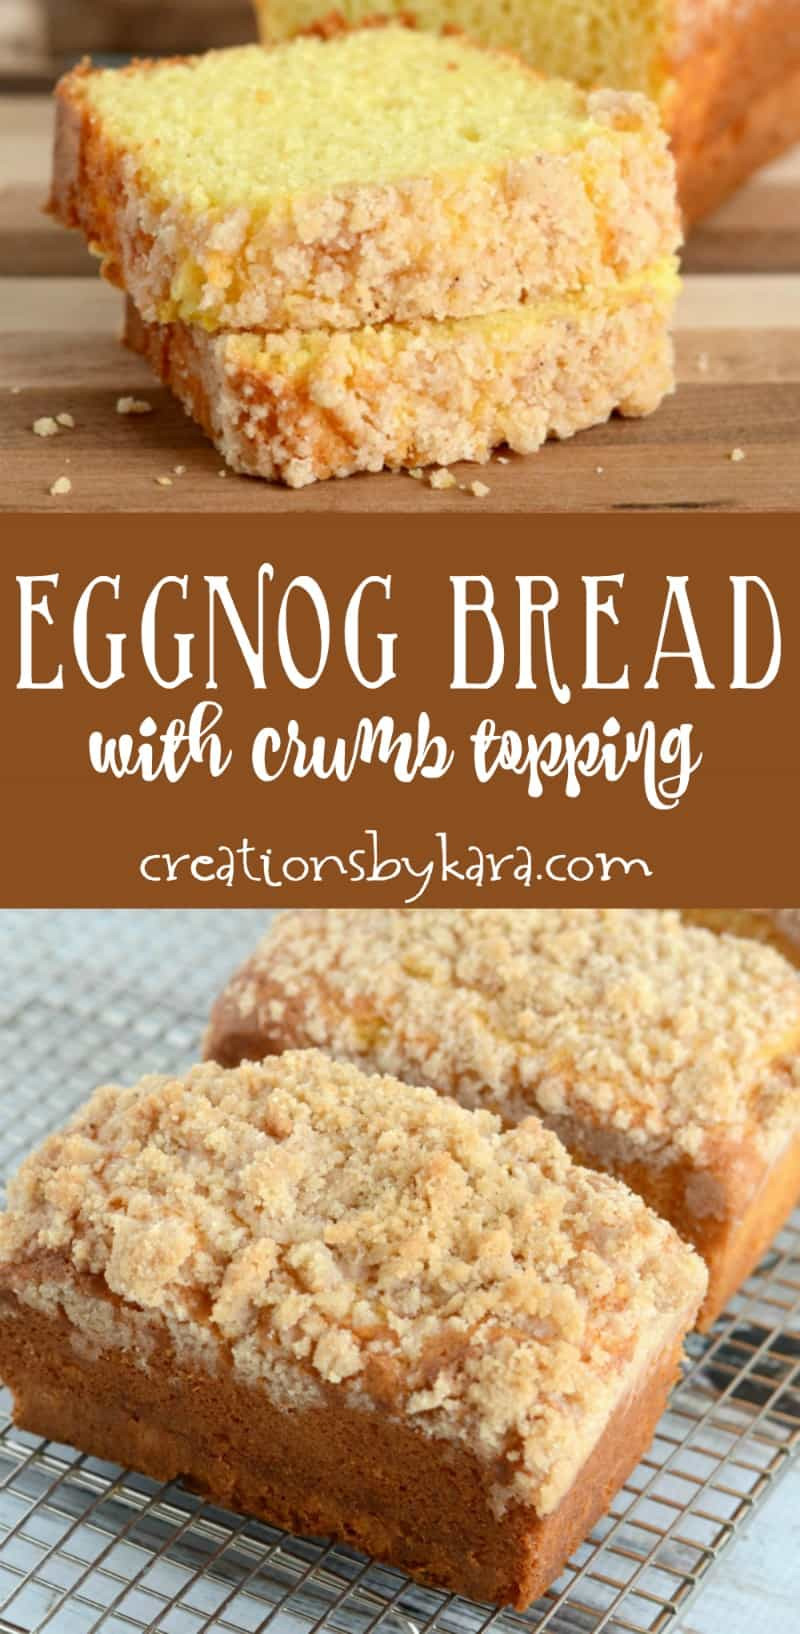 Holiday Quick Bread Recipes
 Eggnog Quick Bread with Crumb Topping Creations by Kara